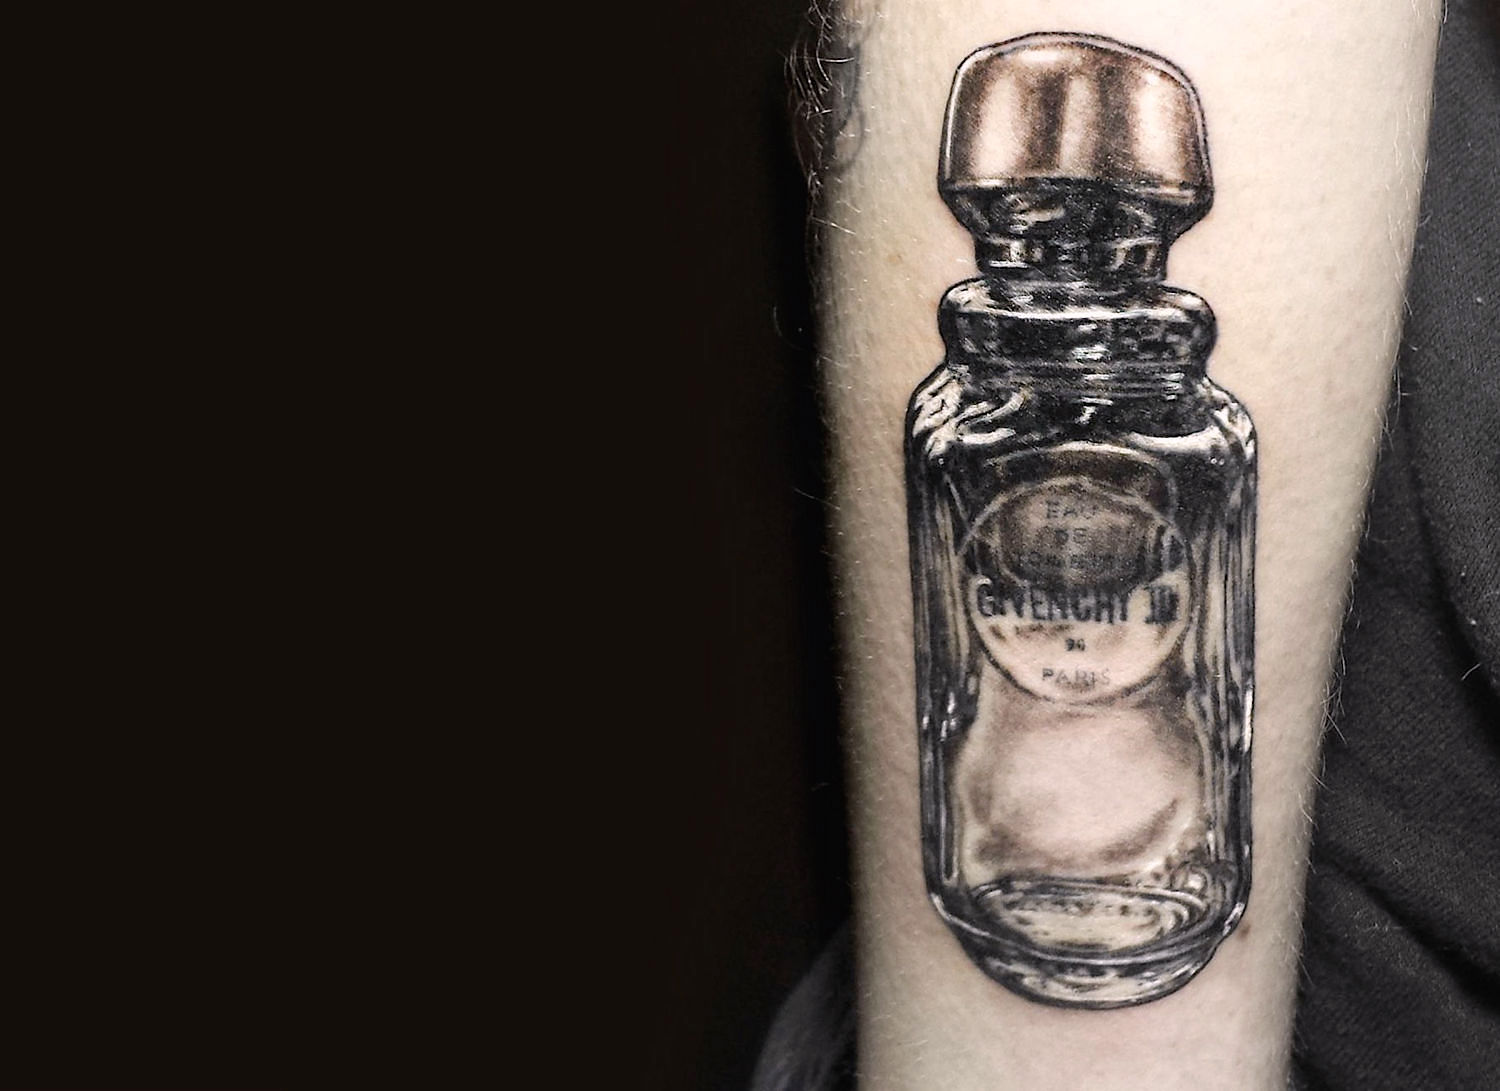 Givenchy perfume bottle tattoo by Shannon Perry